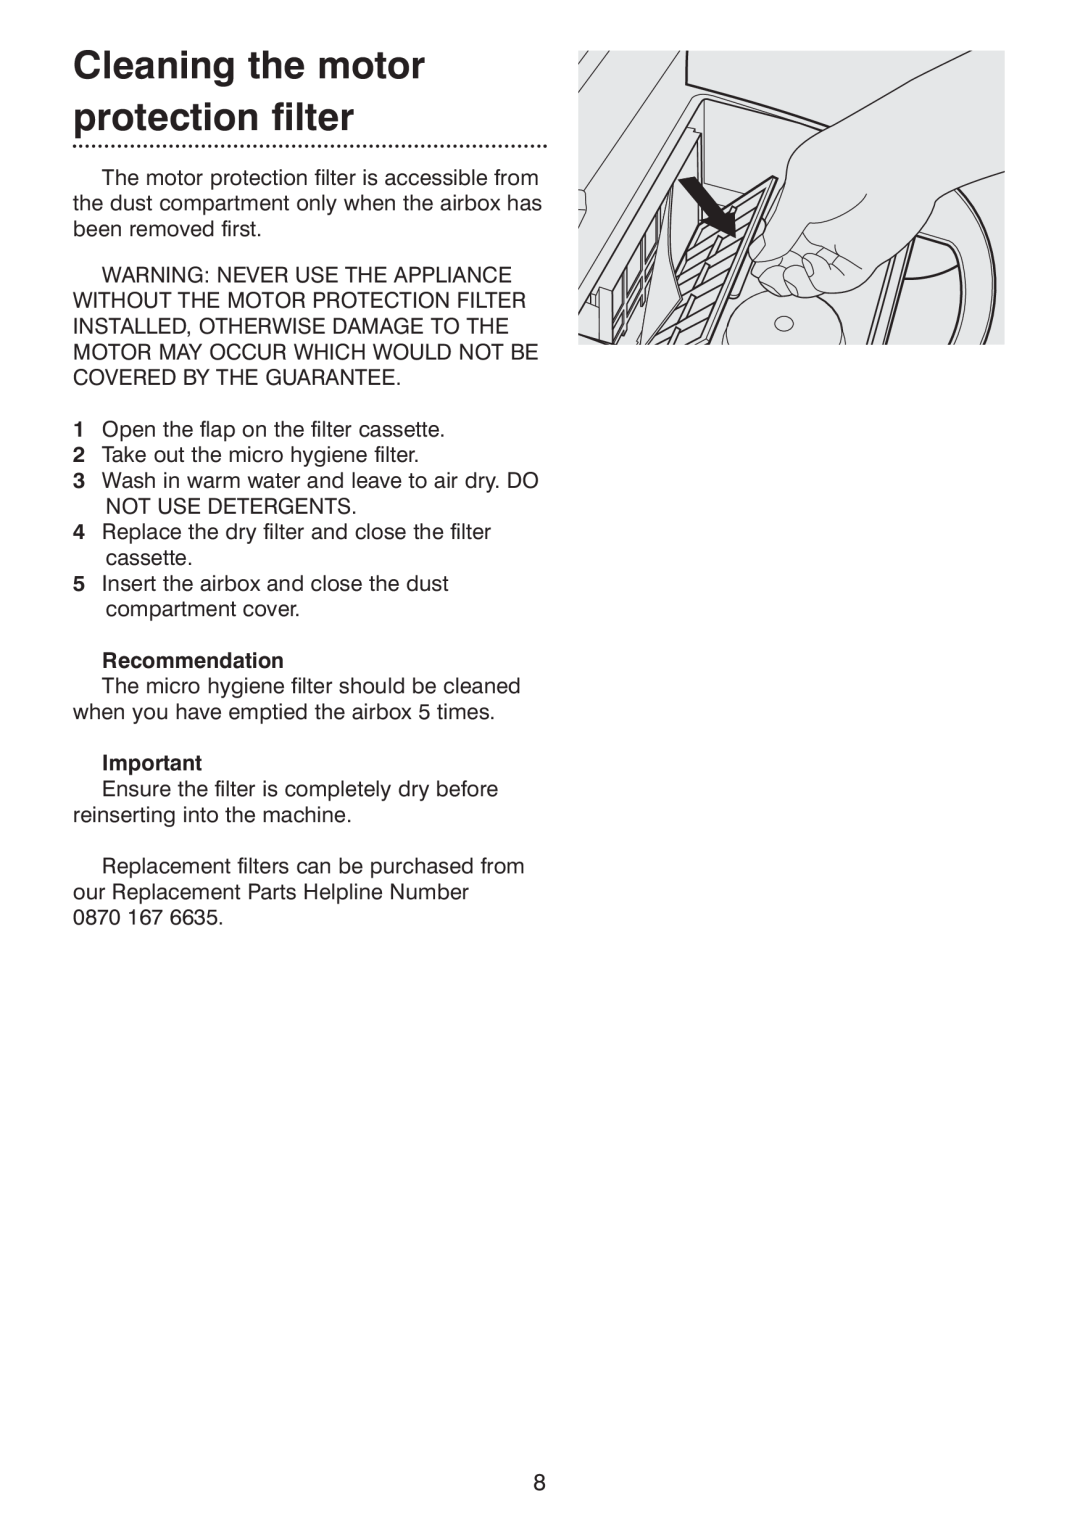 Morphy Richards Ecovac 70096 Rev 2 (Page 1) manual Cleaning the motor protection filter, Recommendation 